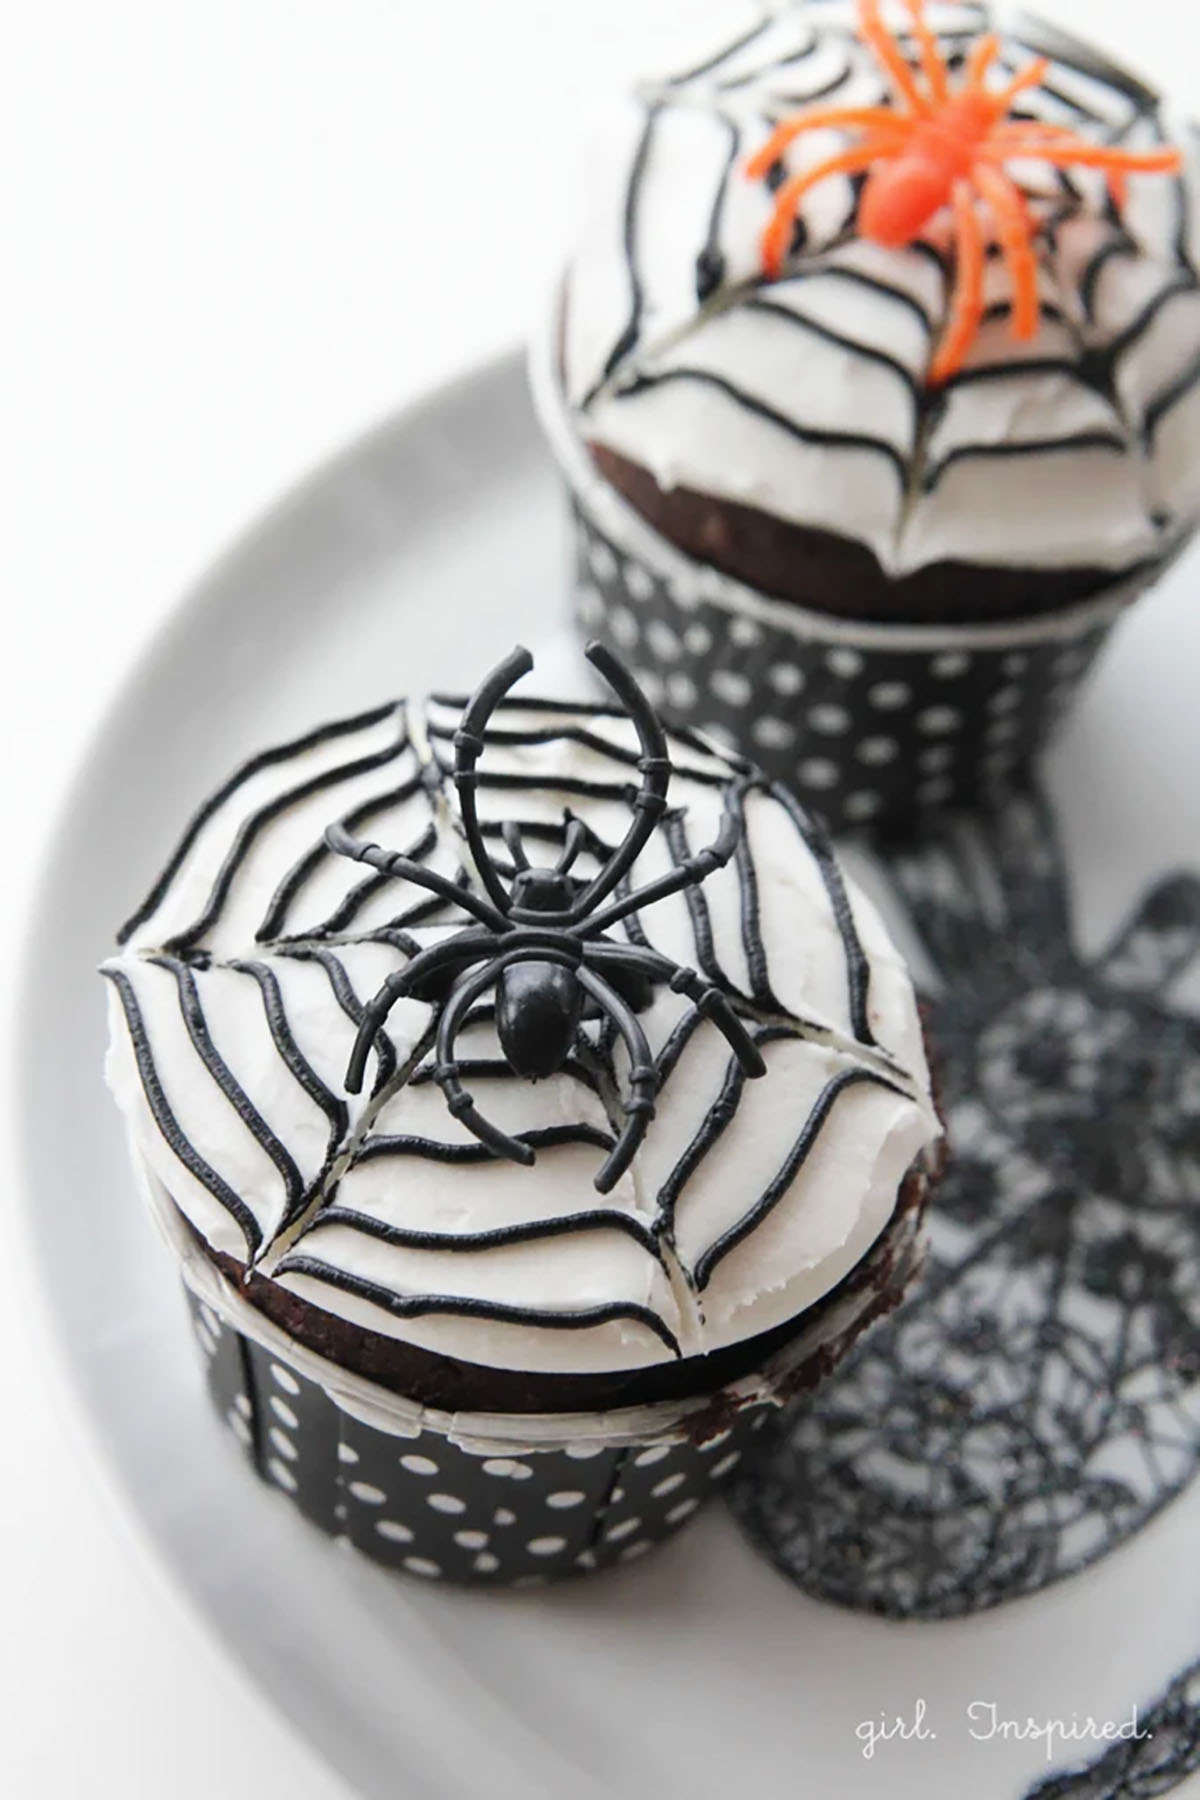 Two cupcakes with white icing and black spiderweb design, with plastic spiders on top.